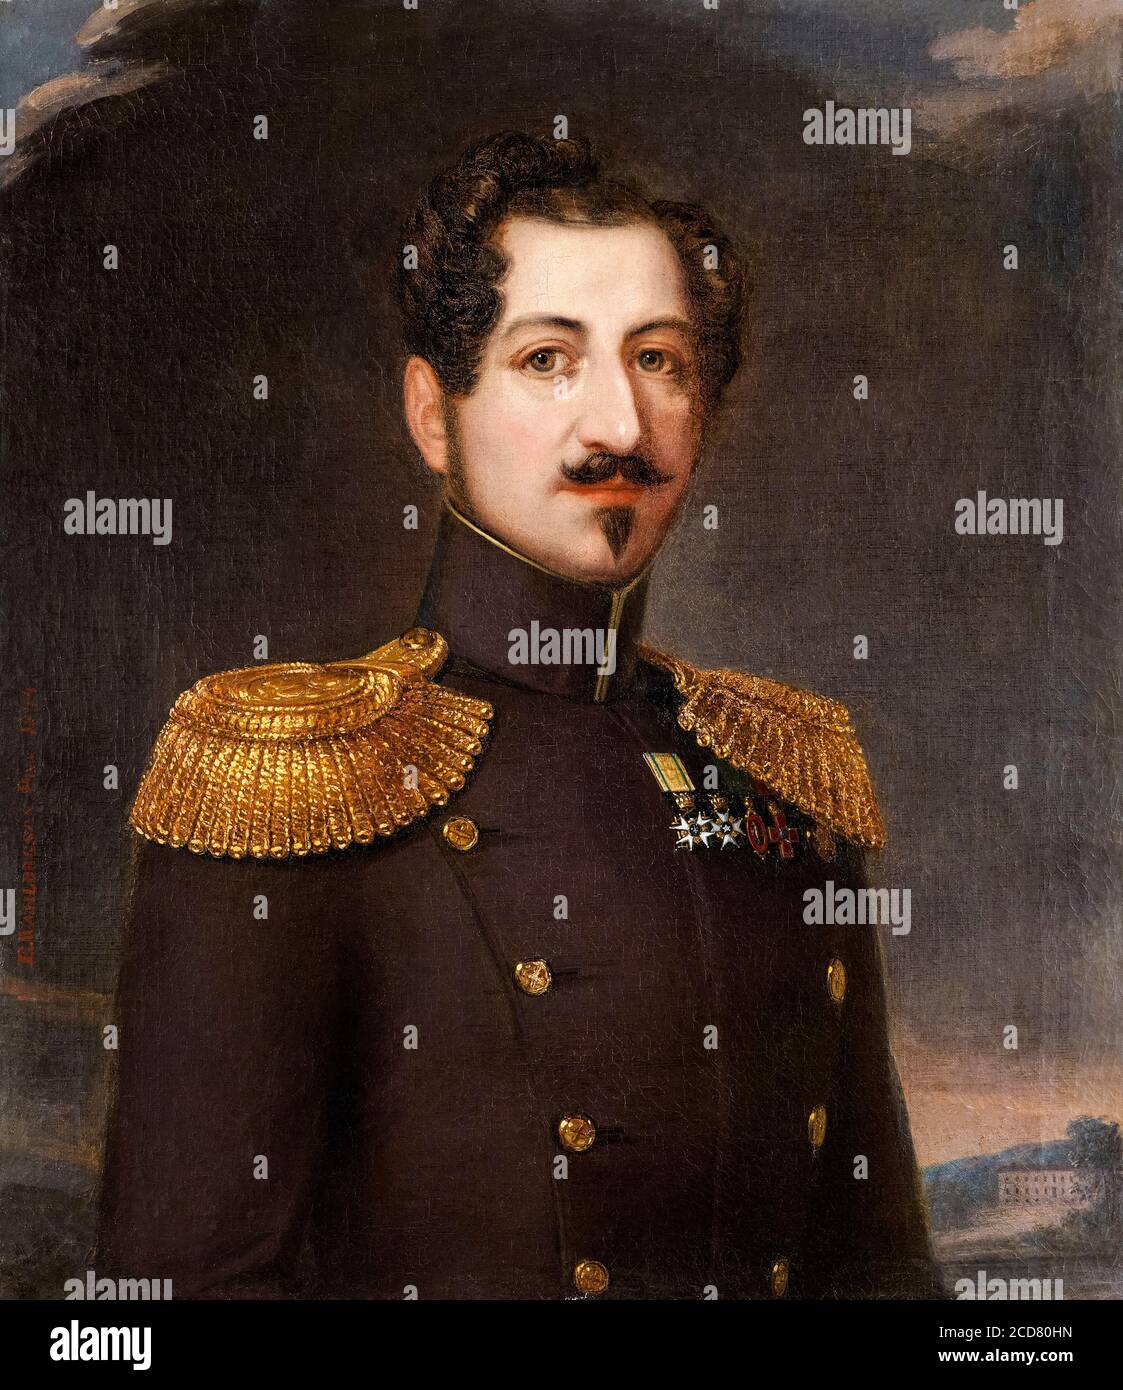 Oscar I (1799-1859), King of Sweden and Norway, portrait painting by Erik (Wahlberg) Wahlbergson, 1844 Stock Photo